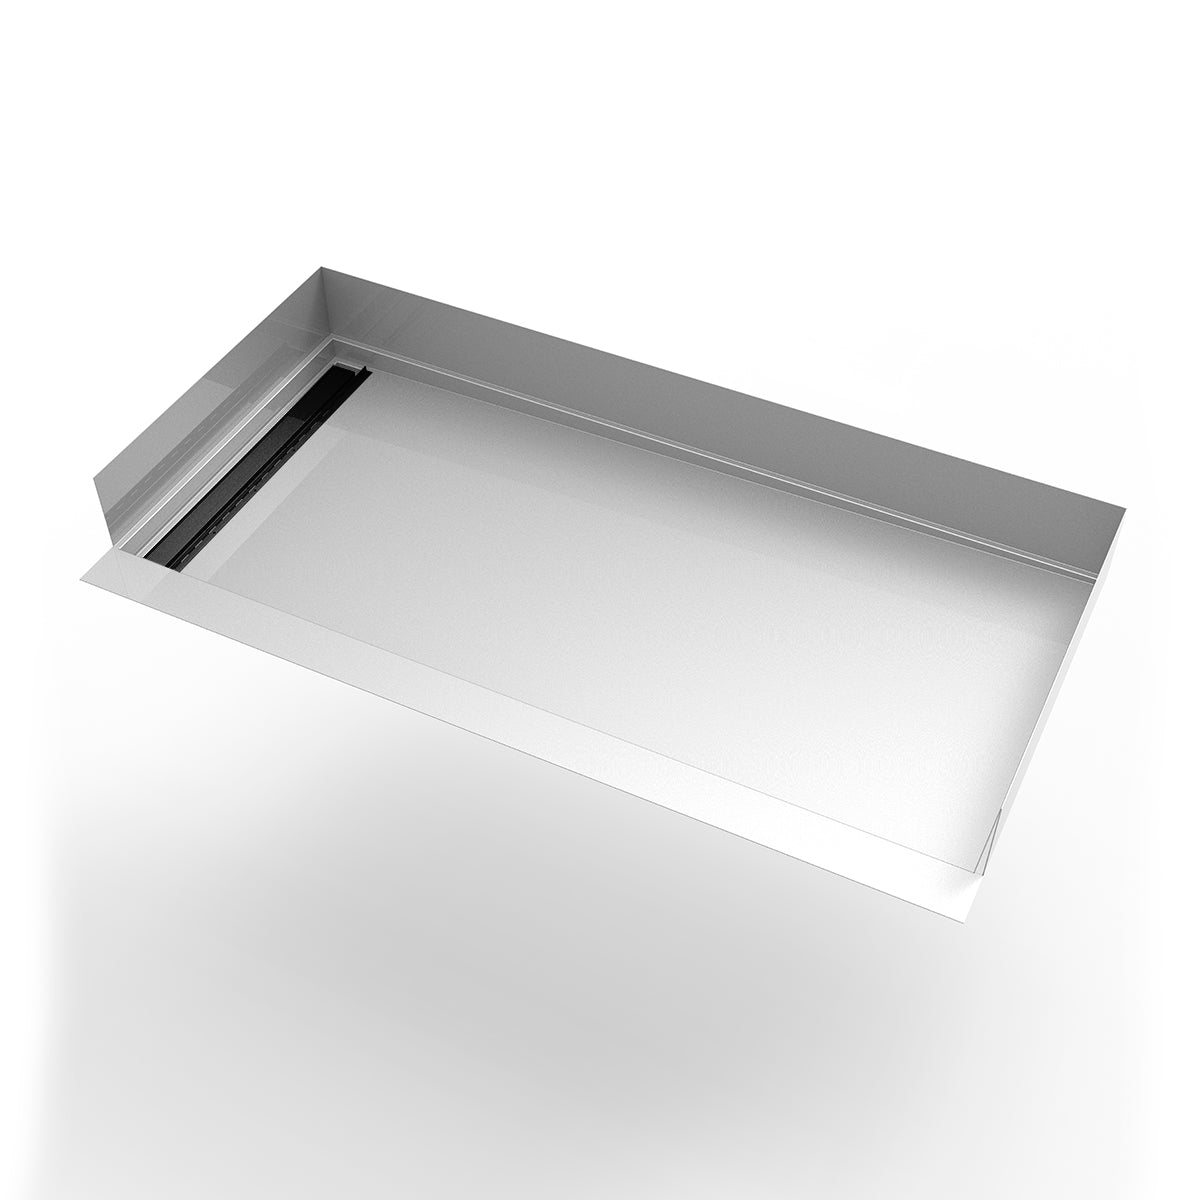 Infinity Drain 30"x 60" Curbless Stainless Steel Shower Base with Left Wall Tile Insert Linear Drain location